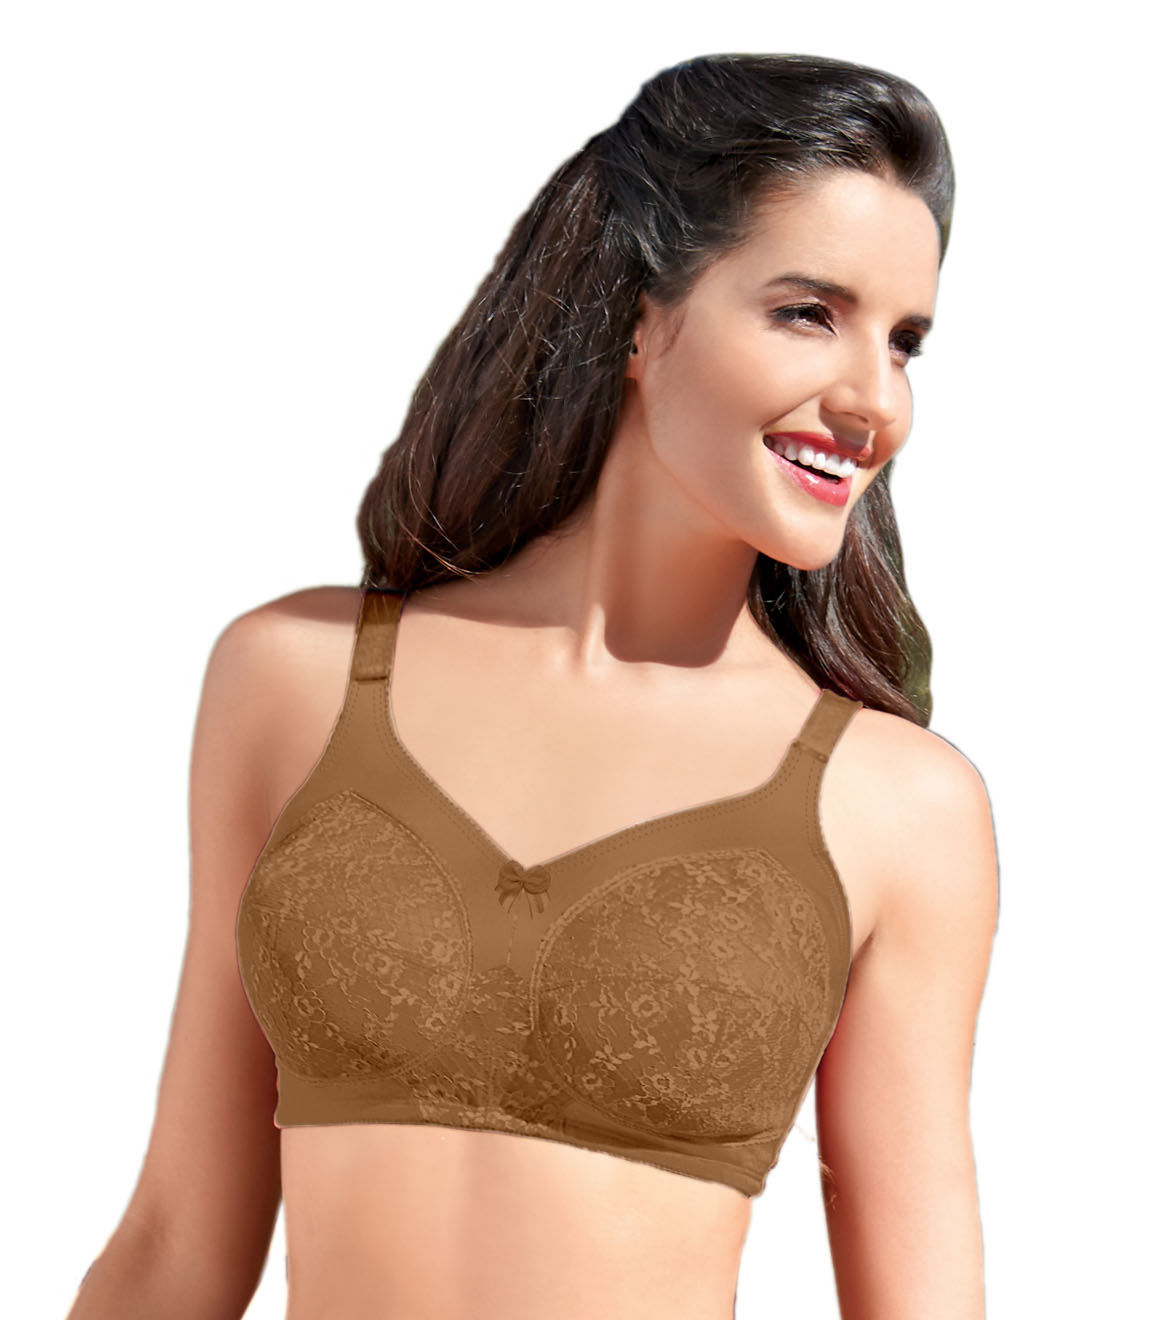 enamor full coverage bra online - OFF-58% >Free Delivery